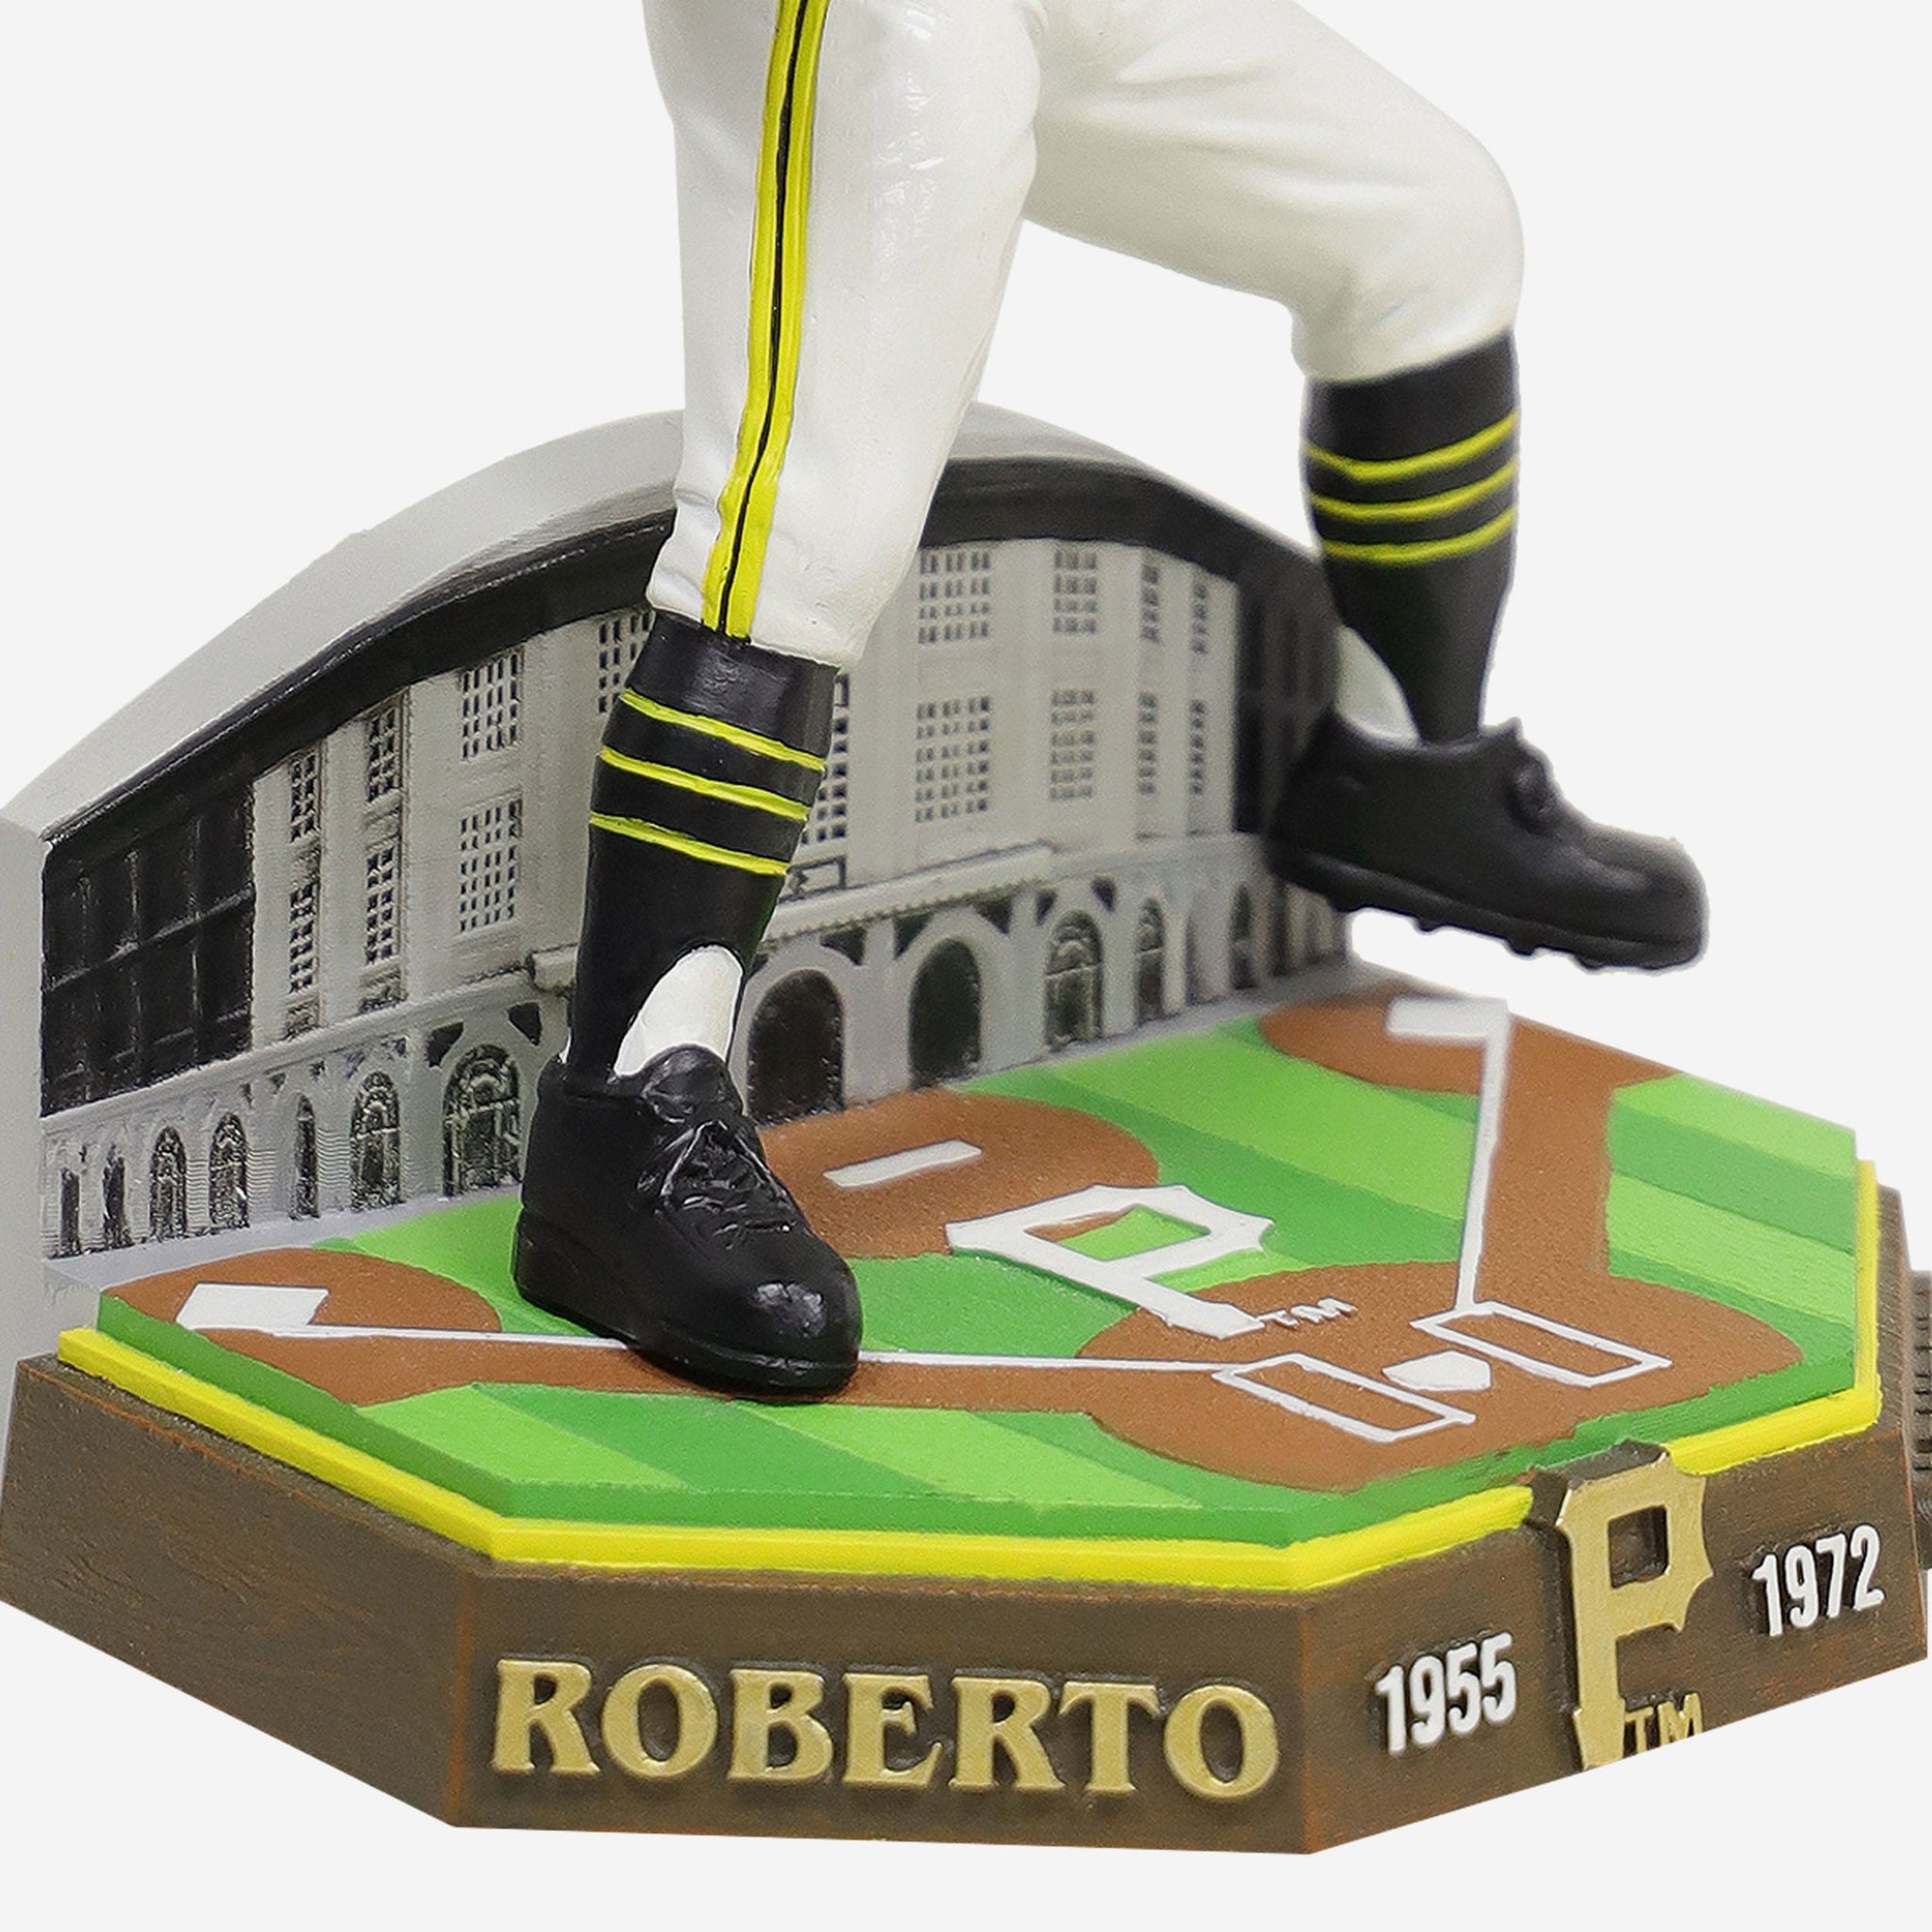 Get Roberto Clemente 21 years Pittsburgh Pirates 1955 1972 thank